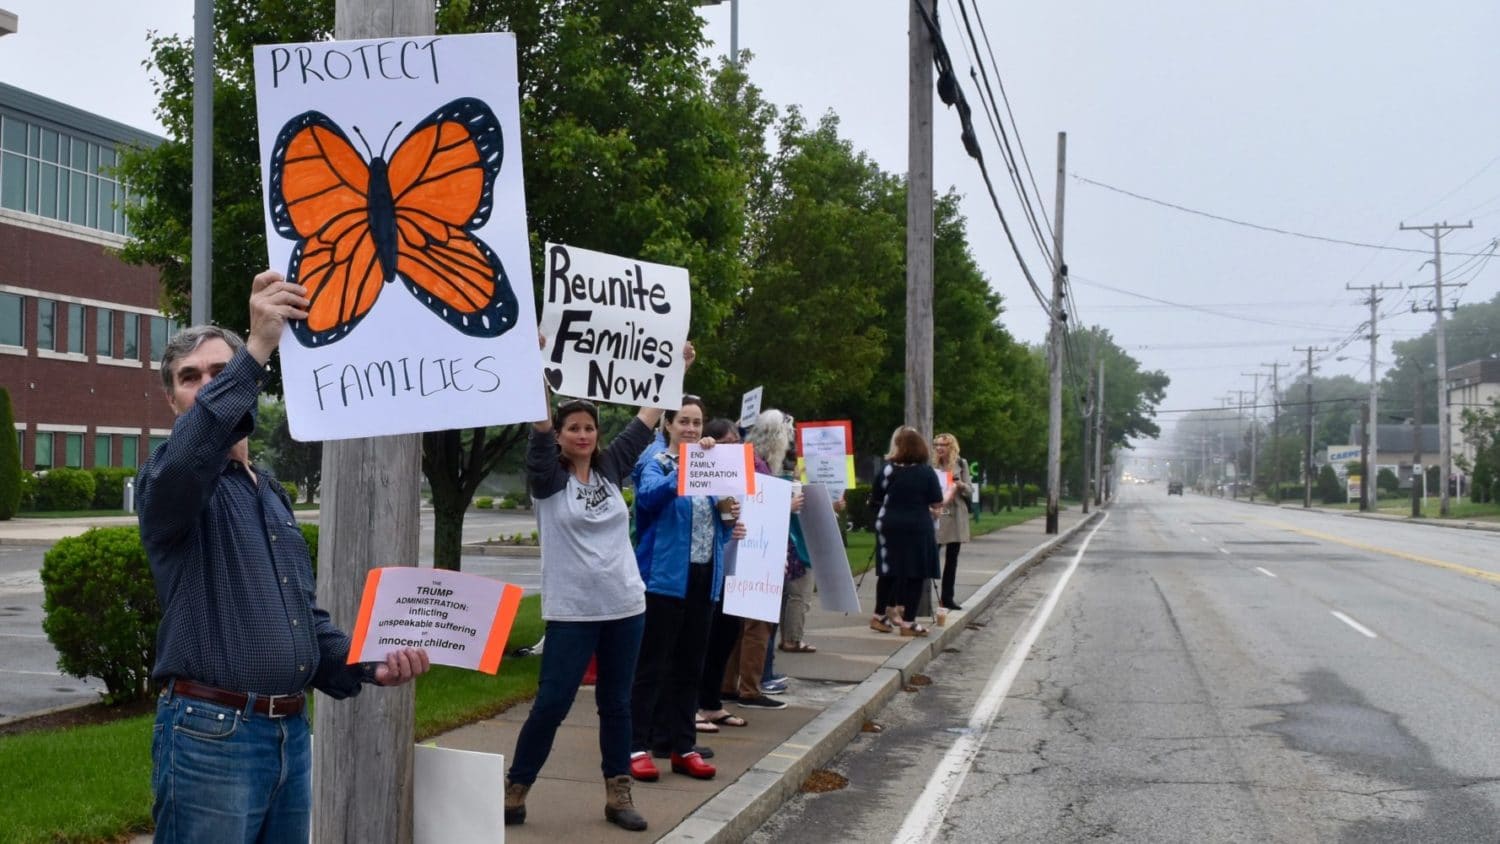 Protesters demand end to family separation at Homeland Security office in Warwick